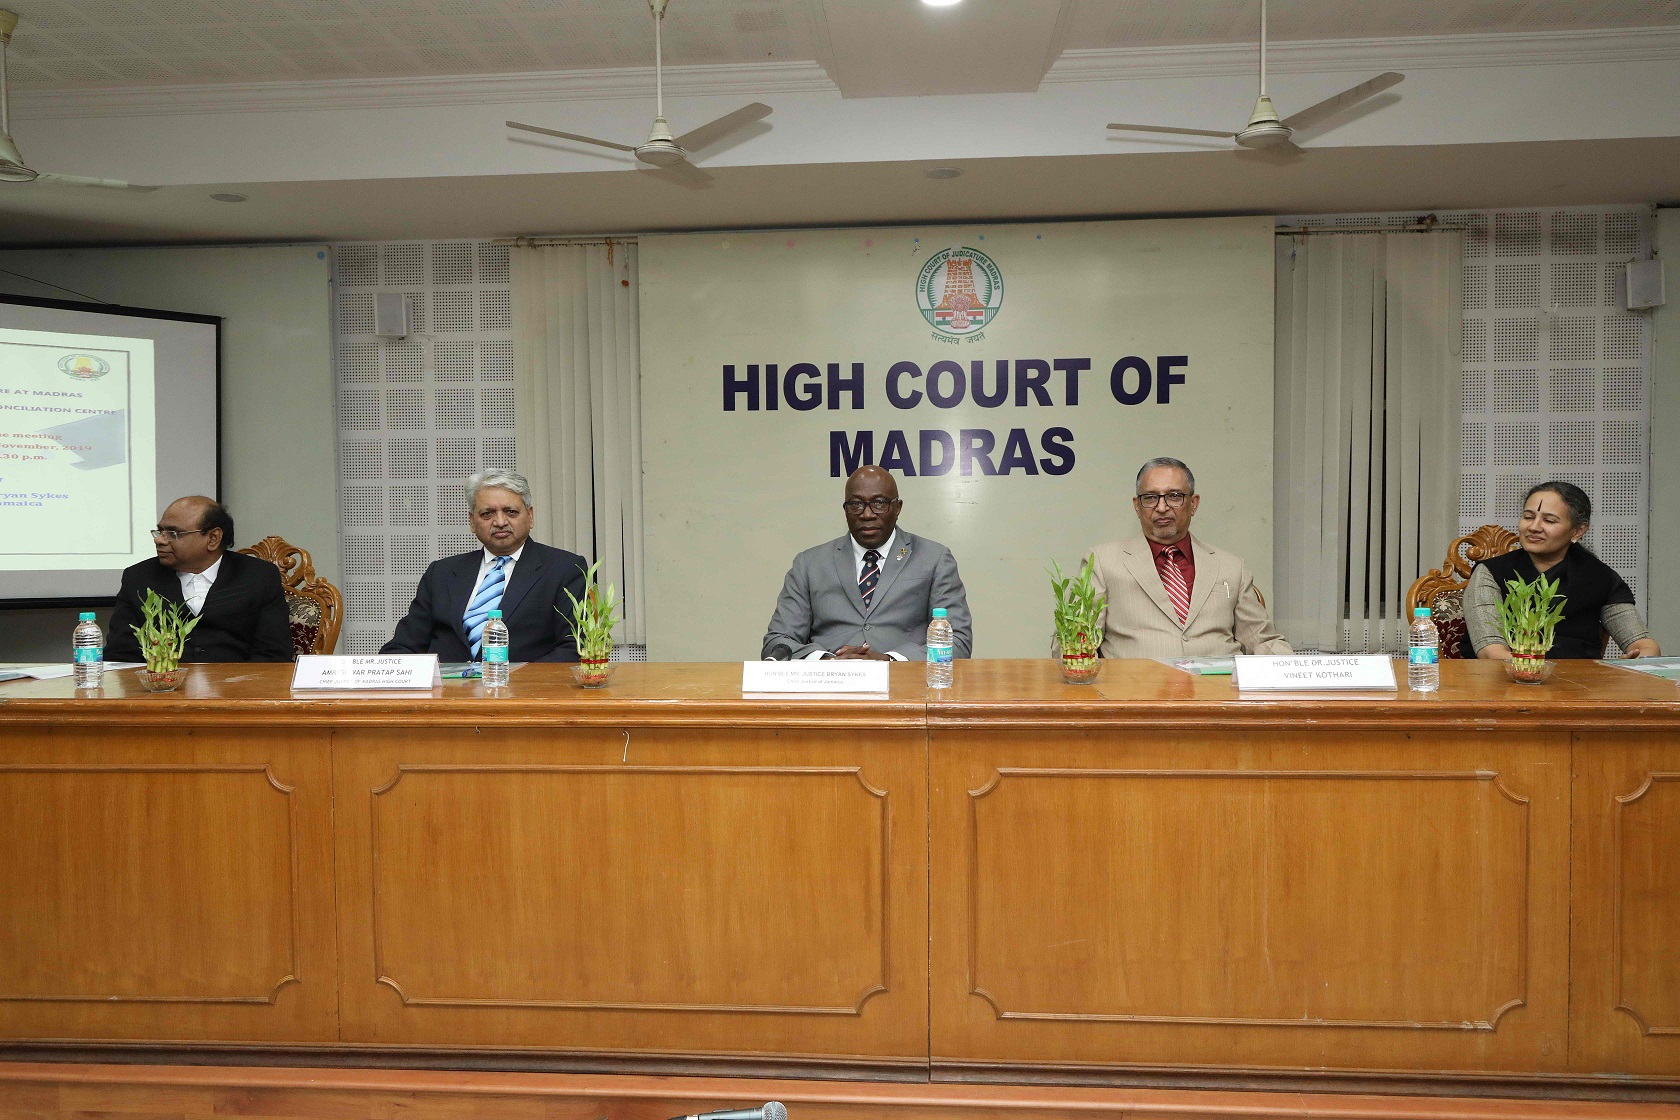 Visit of Hon’ble Mr.Justice Bryan Sykes, Chief Justice of Jamaica